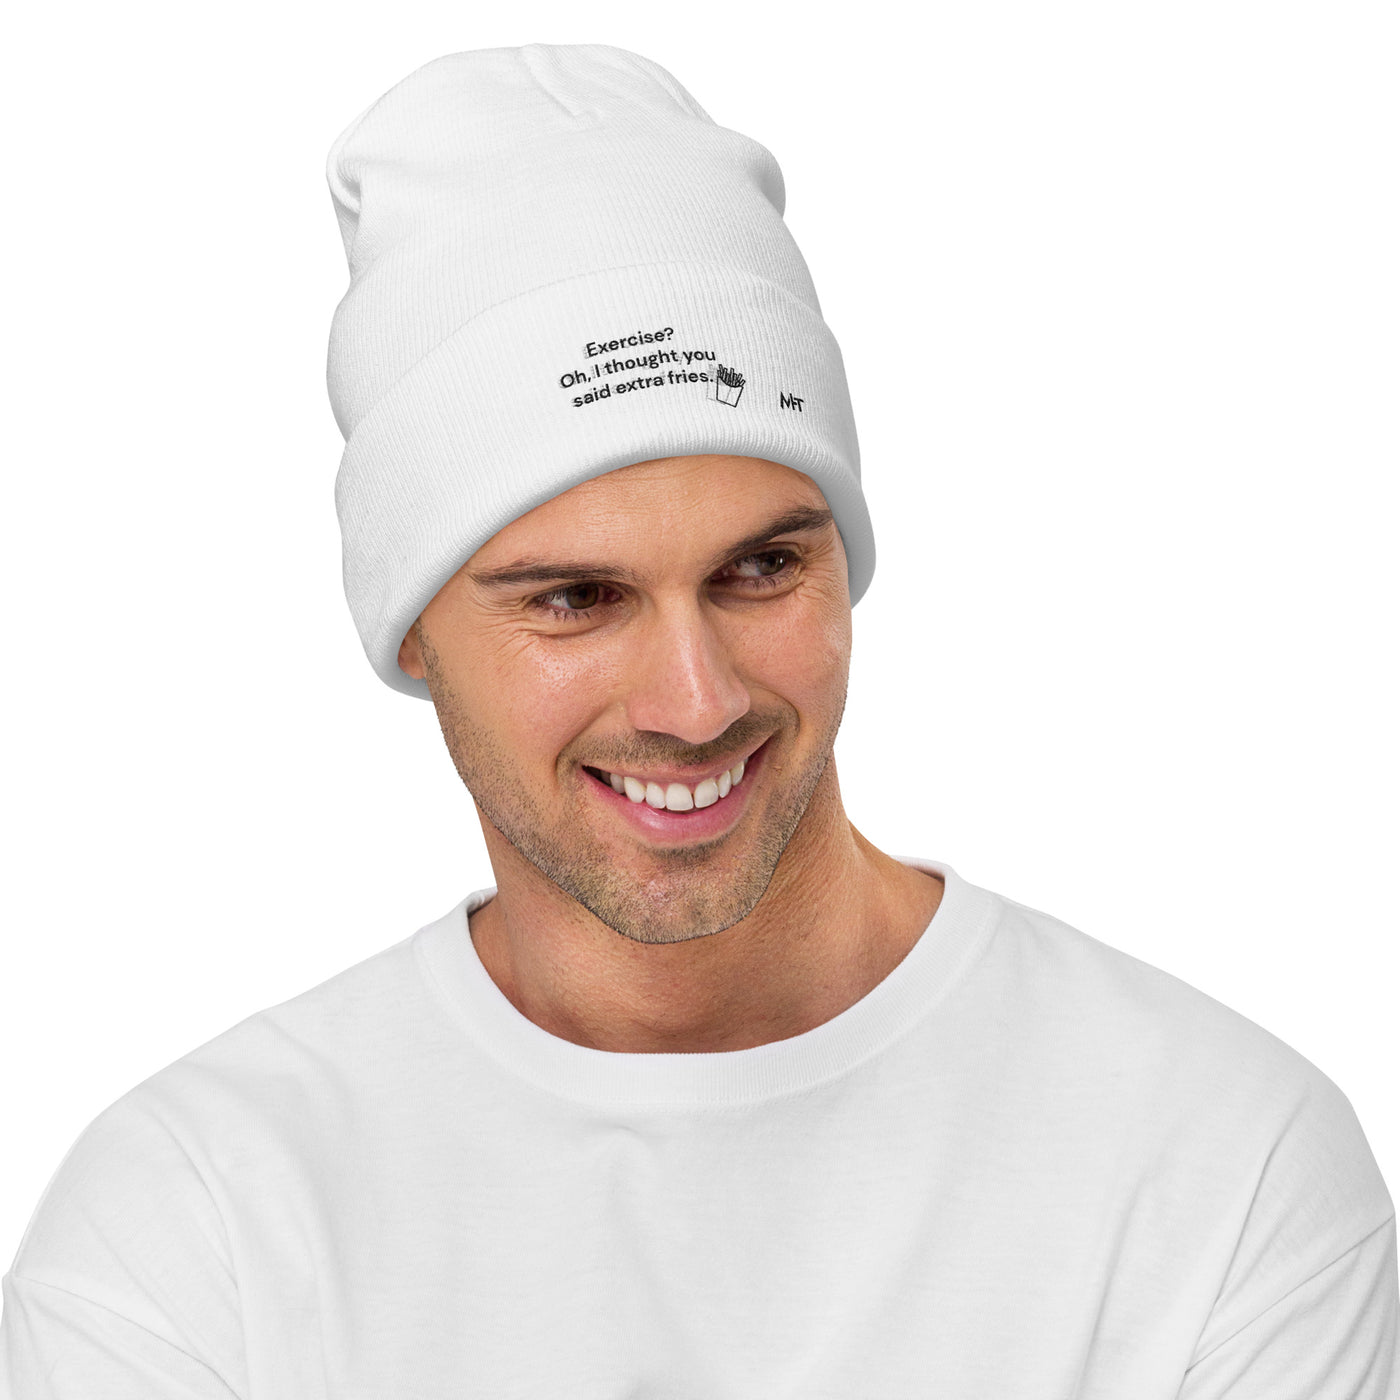 Exercise? Oh, I thought you said extra fries - Embroidered Beanie